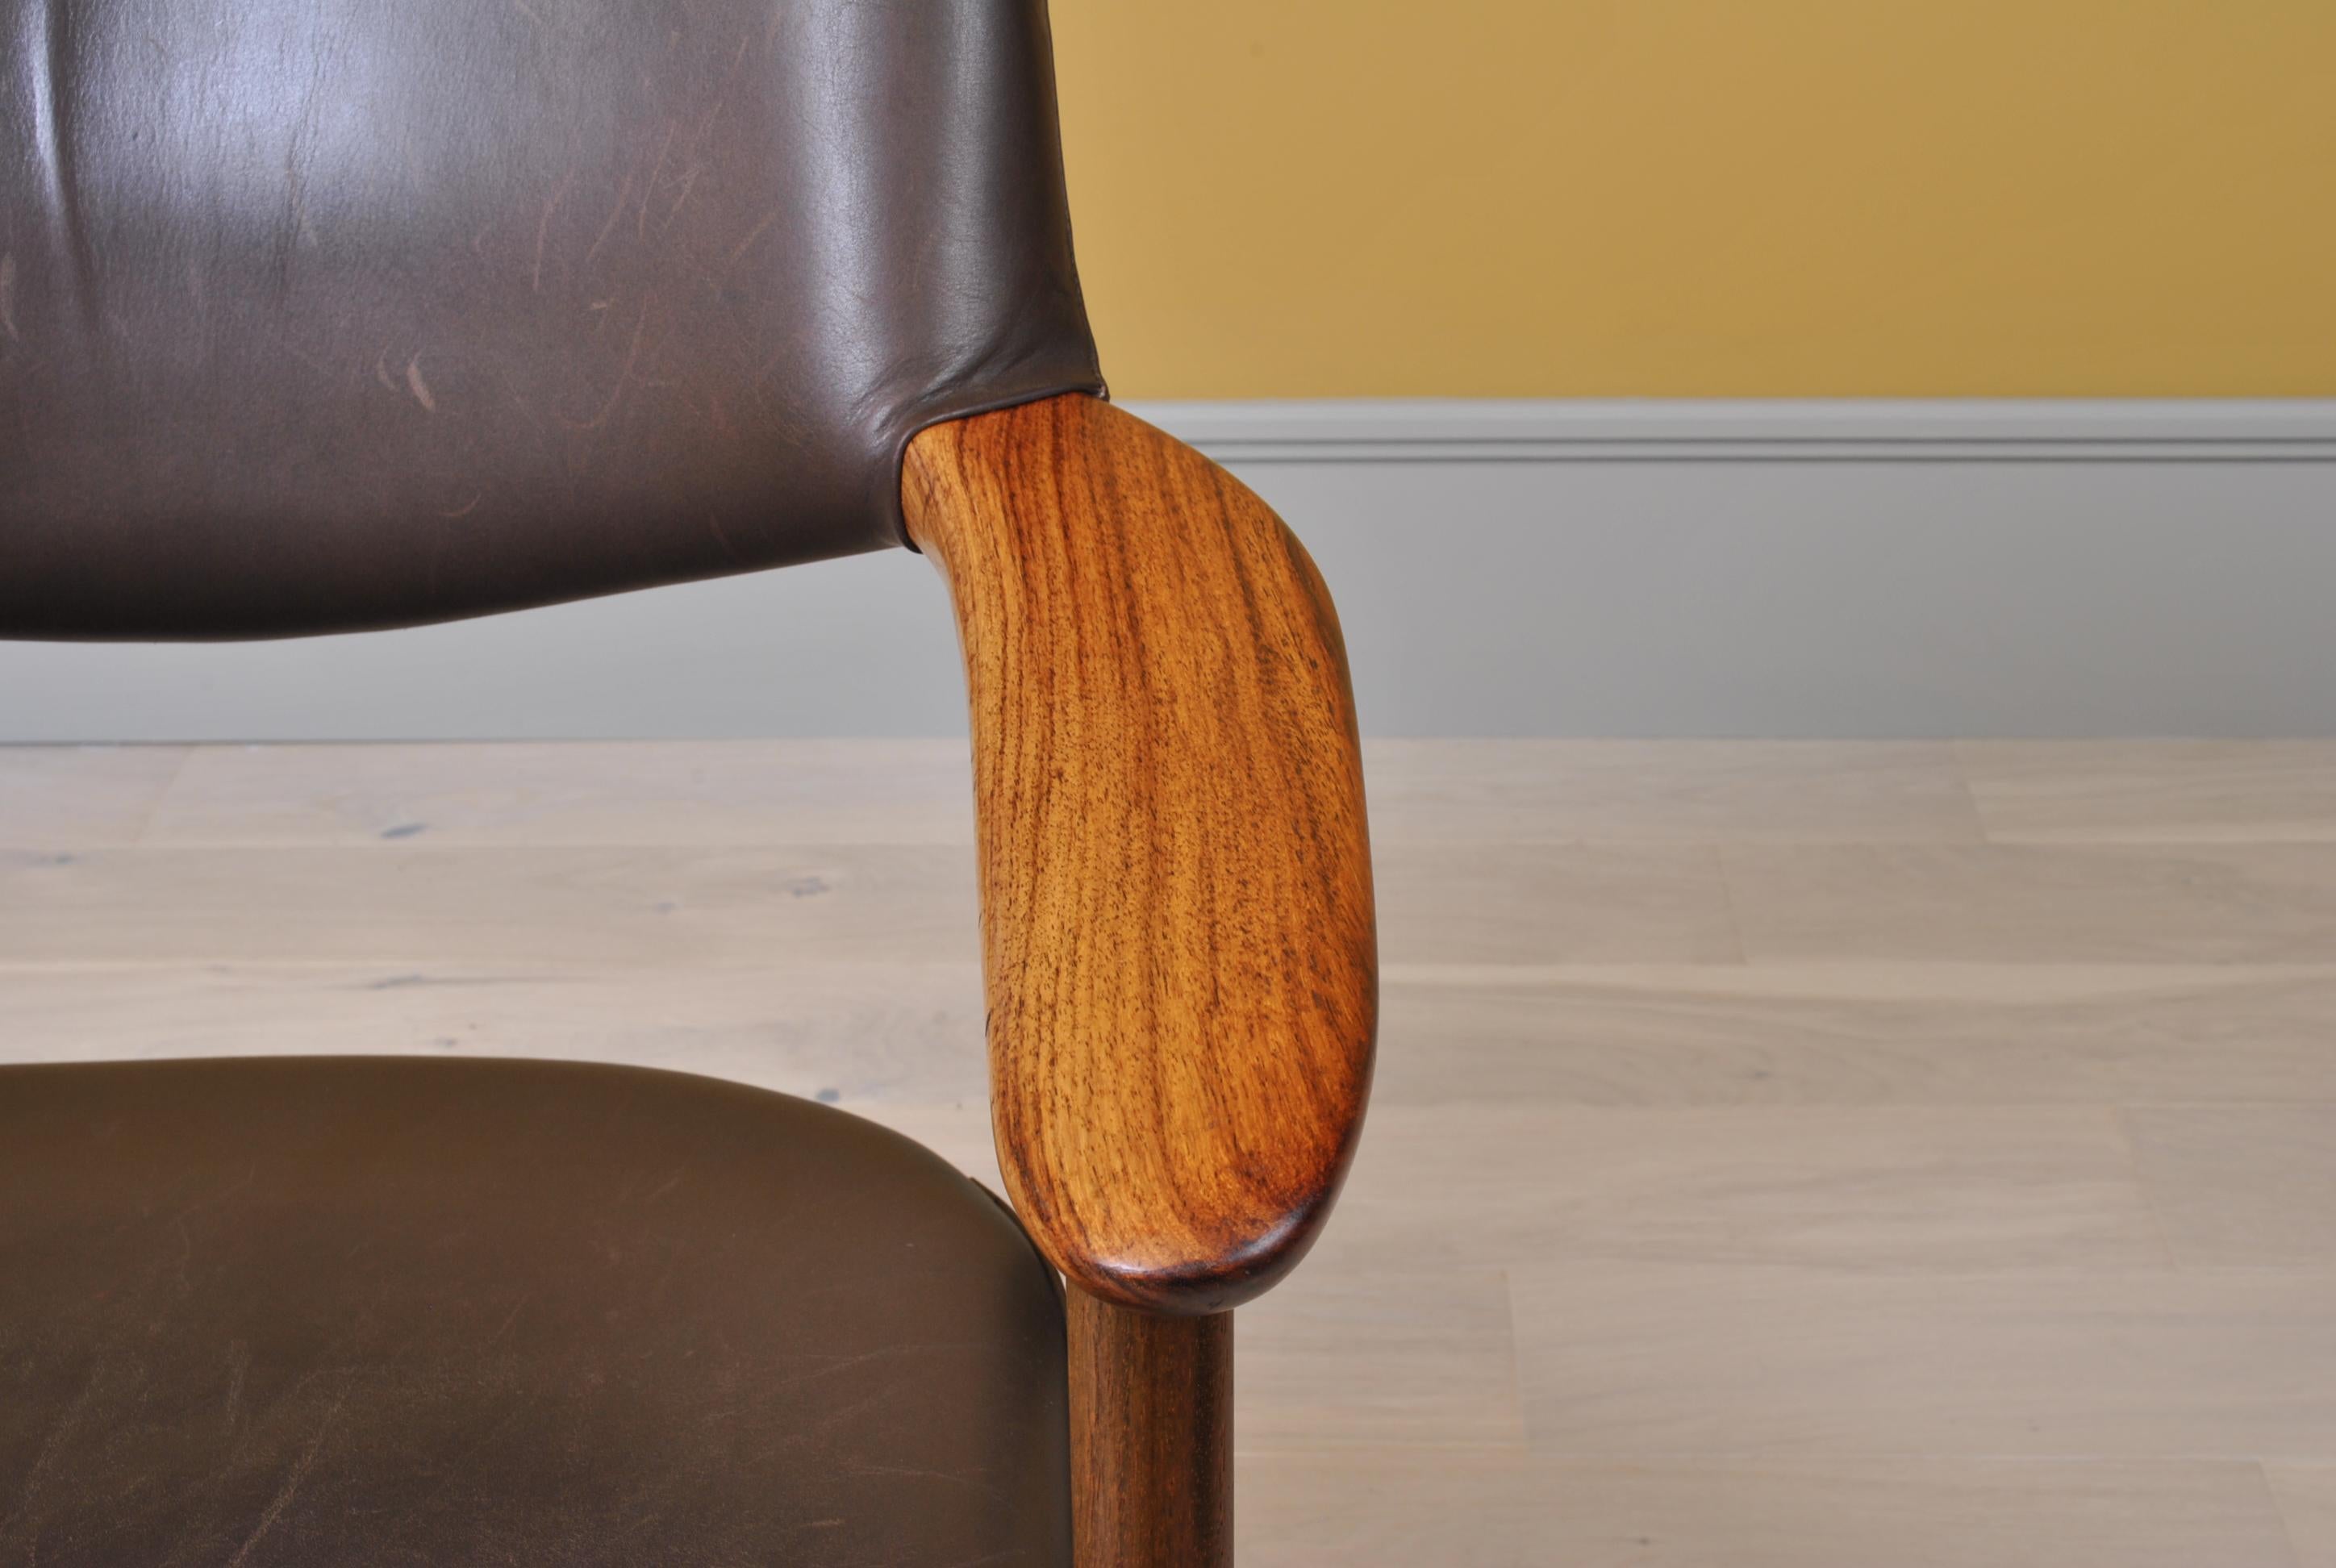 The Erik Kirkegaard desk chair is possibly the most comfortable chair of its kind that we’ve encountered over the years. The curves and angles hold and support the body extremely well. The chairs have walnut frames and dark brown leather upholstery.